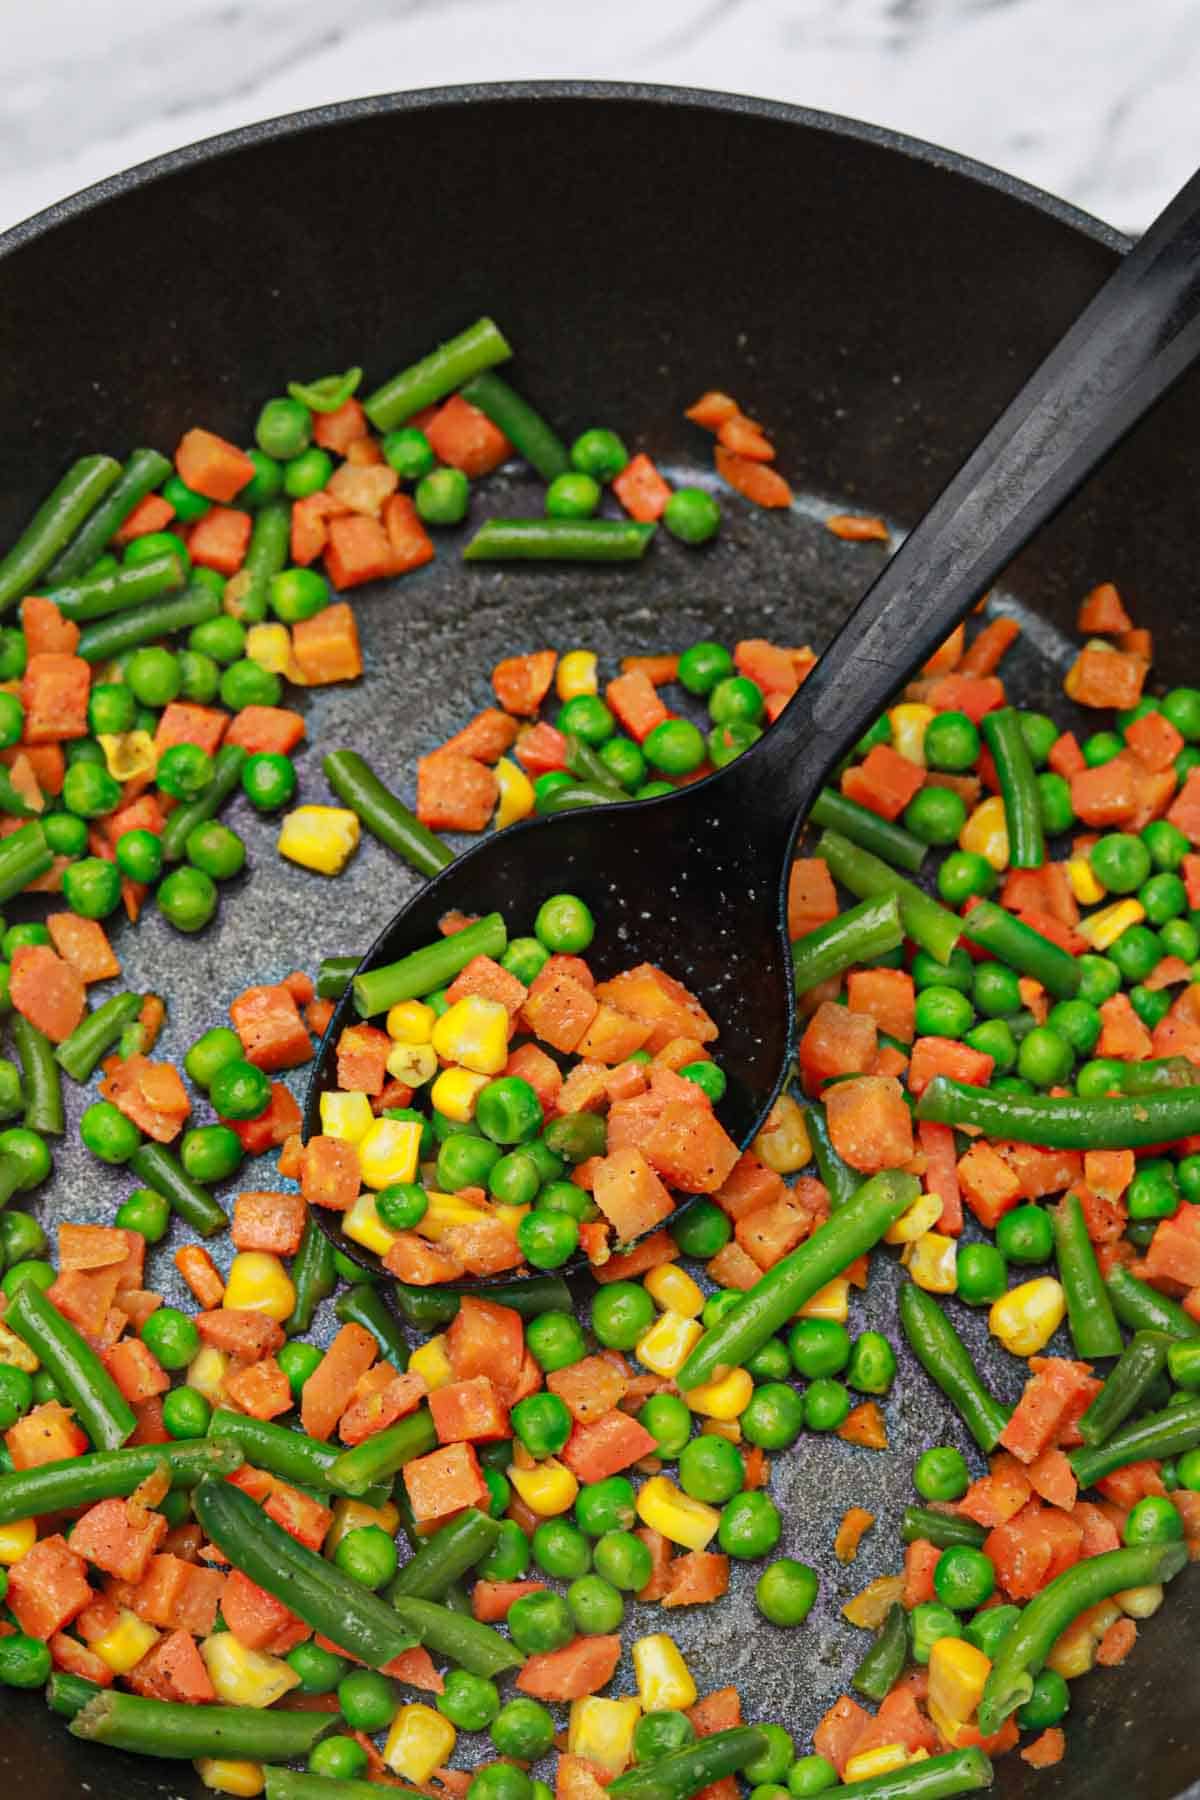 cooking frozen vegetables on the stove.